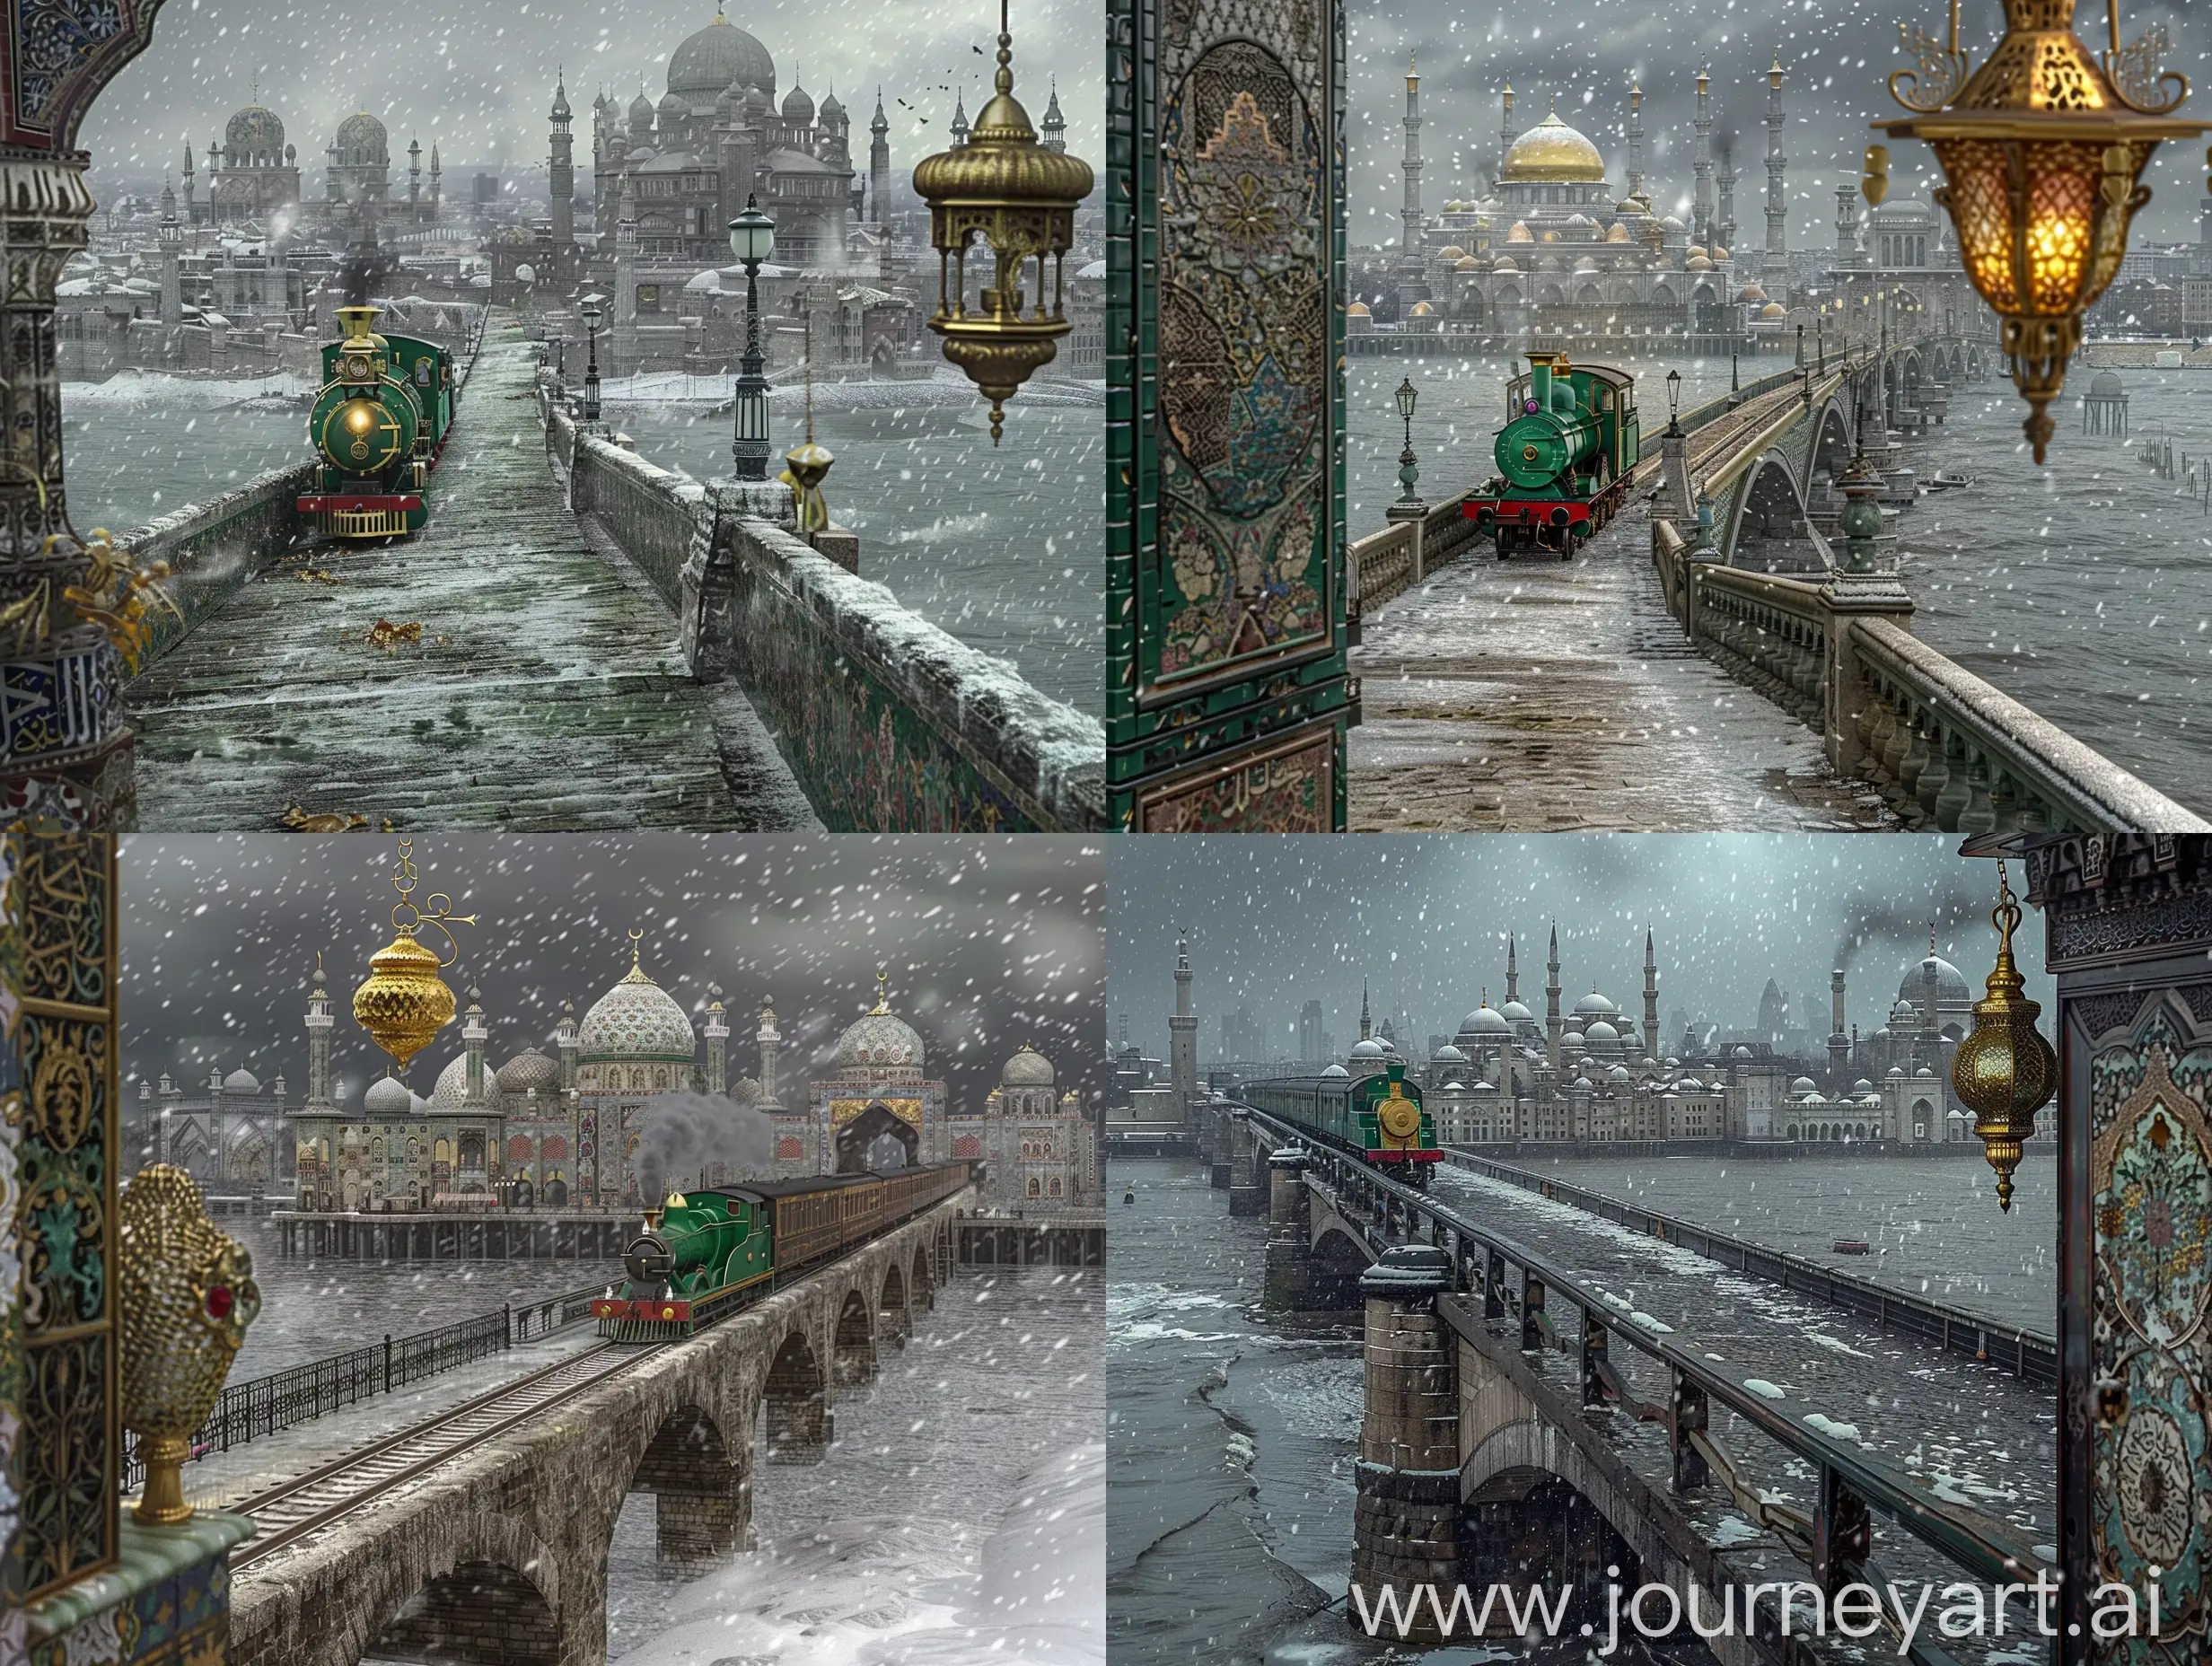 Islamic-Stonebridge-Overlooking-Seafront-City-with-Moving-Steam-Engine-Train